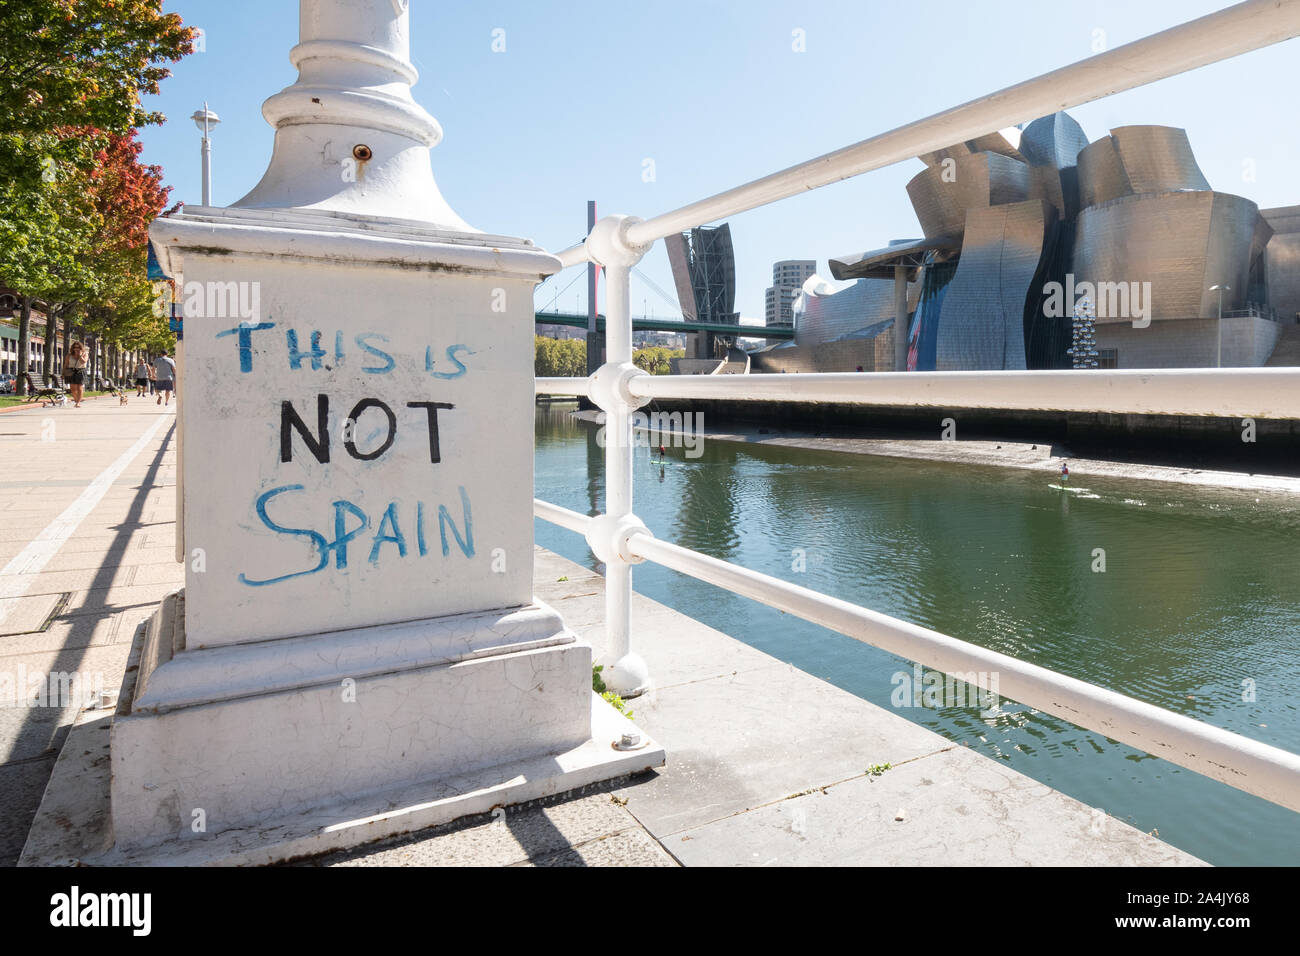 Basque Independence graffiti 'This is Not Spain' on lamp post opposite the Guggenheim Museum, Bilbao, Basque Country, Spain, Europe Stock Photo